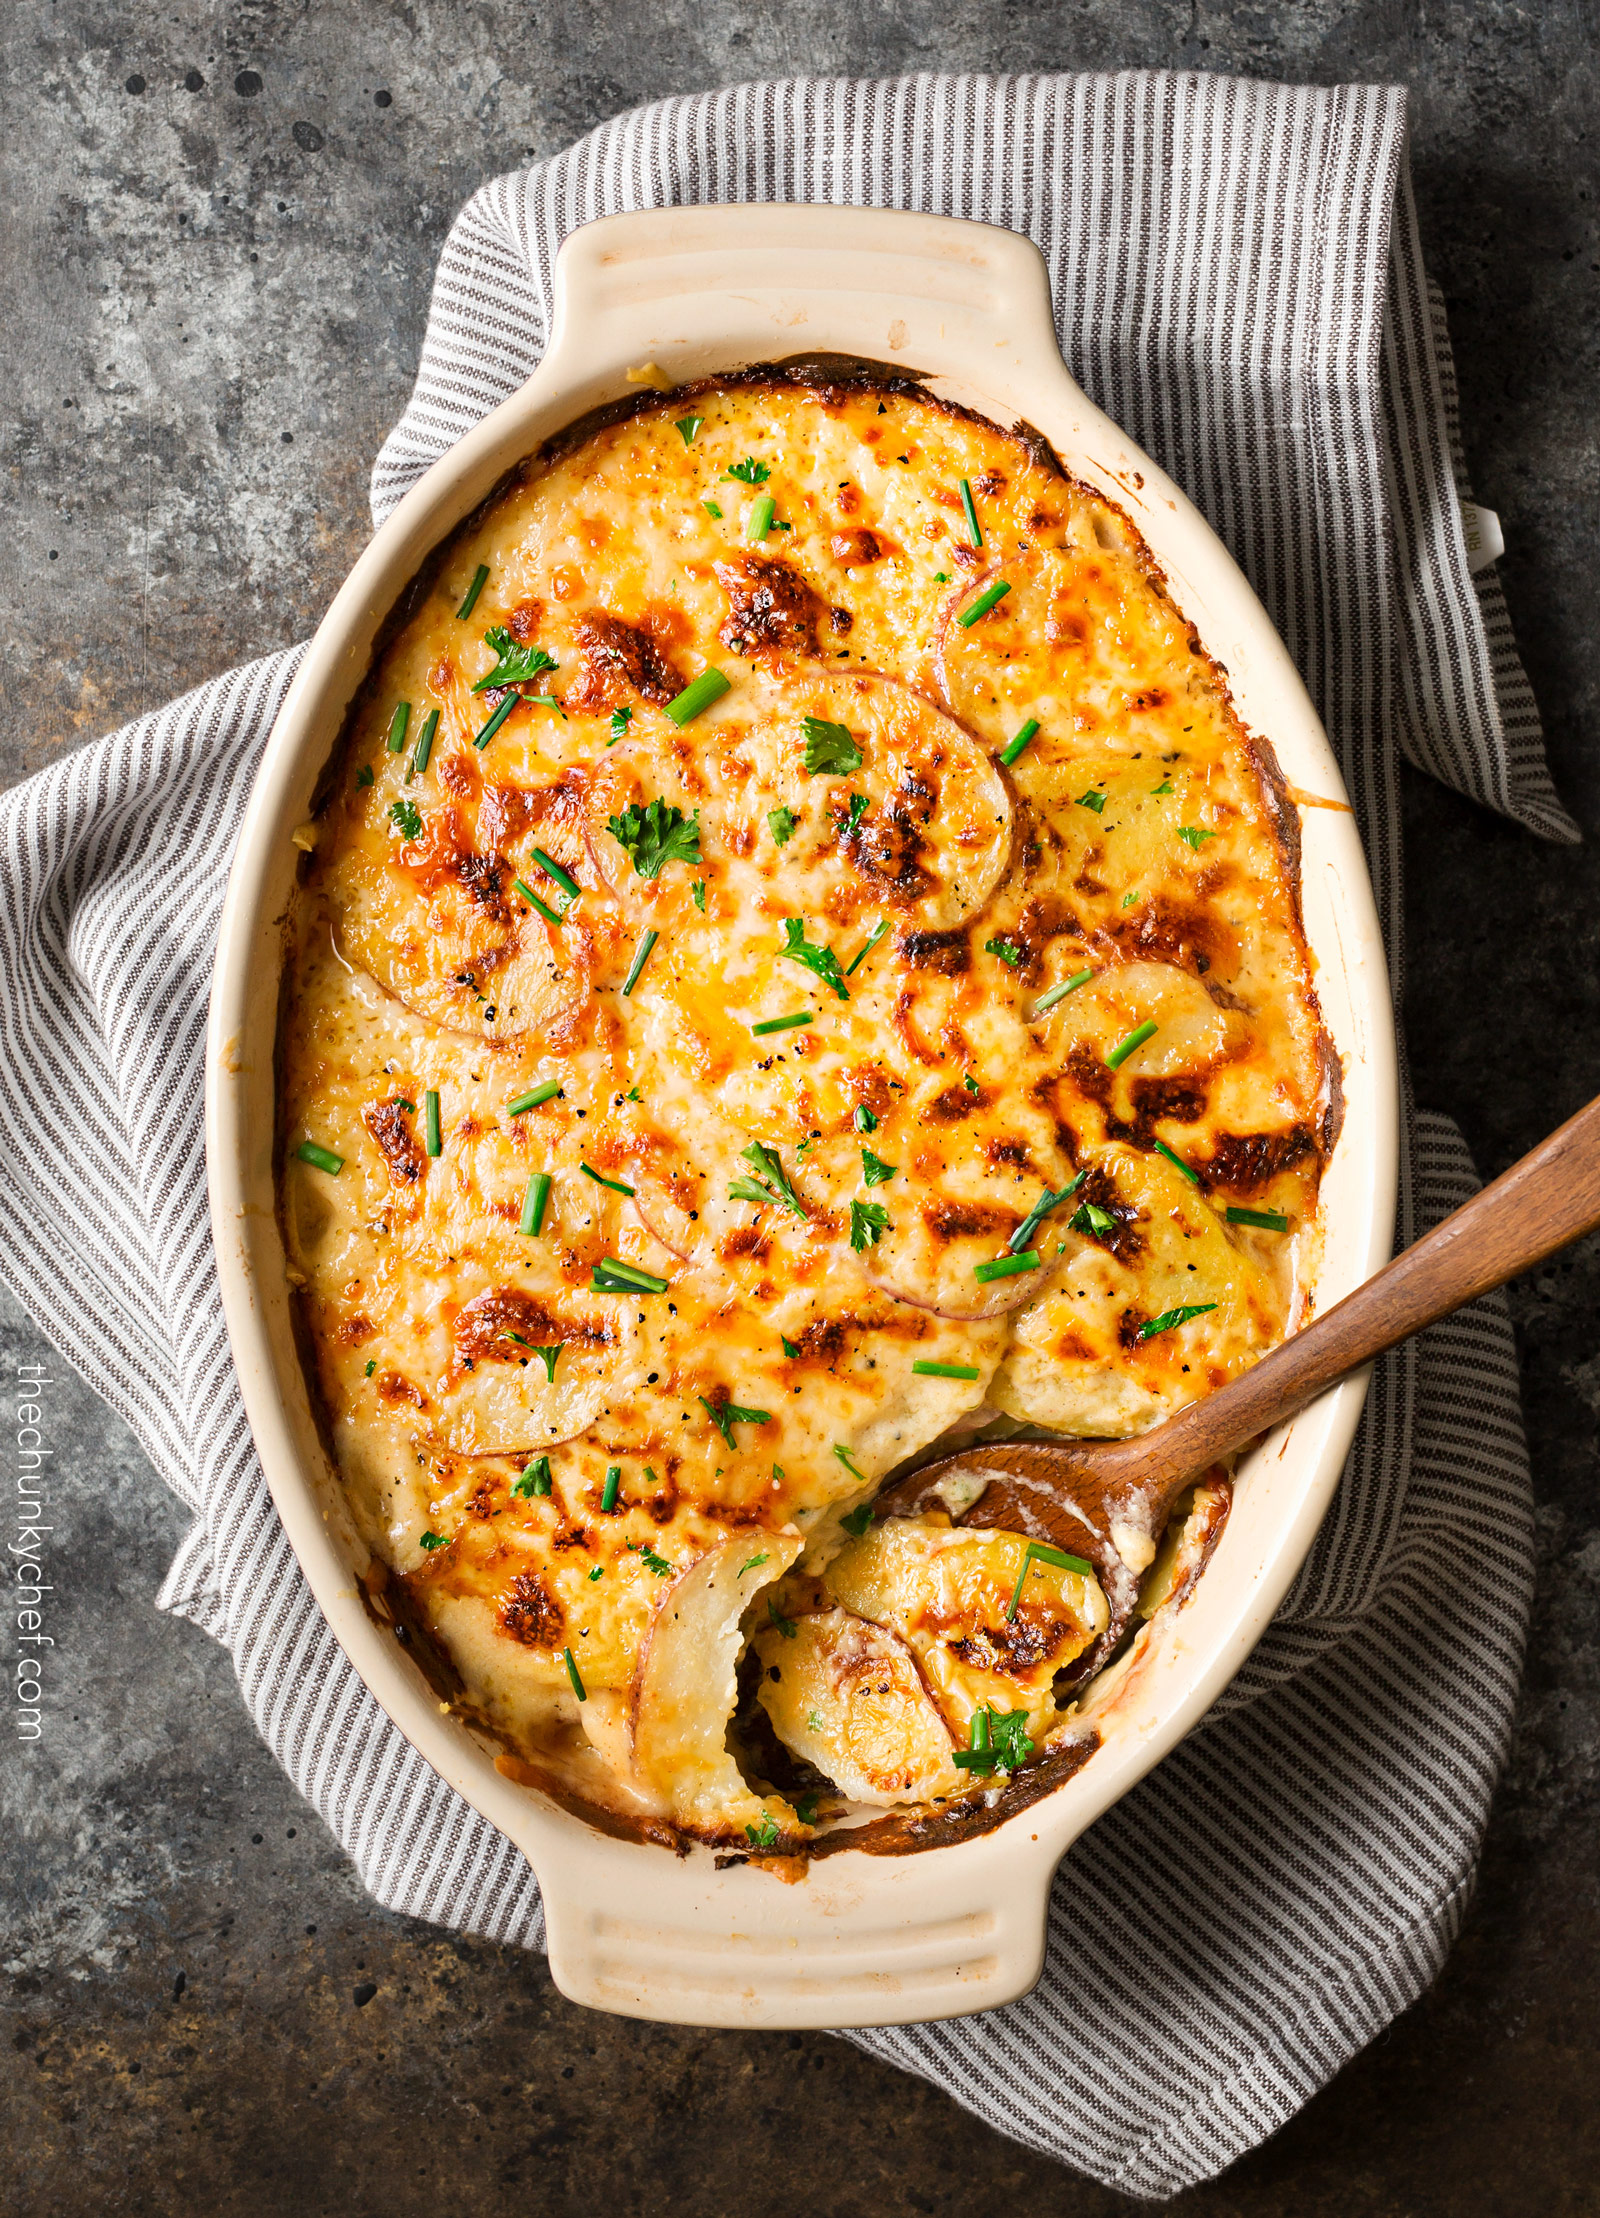 Garlic Parmesan Cheesy Scalloped Potatoes | Velvety soft and tender layers of two kinds of potatoes, smothered in a rich 3 cheese garlic sauce, then topped with extra cheese for a perfectly crispy top! It's the scalloped potato dish you've been dreaming of your entire life! | https://thechunkychef.com